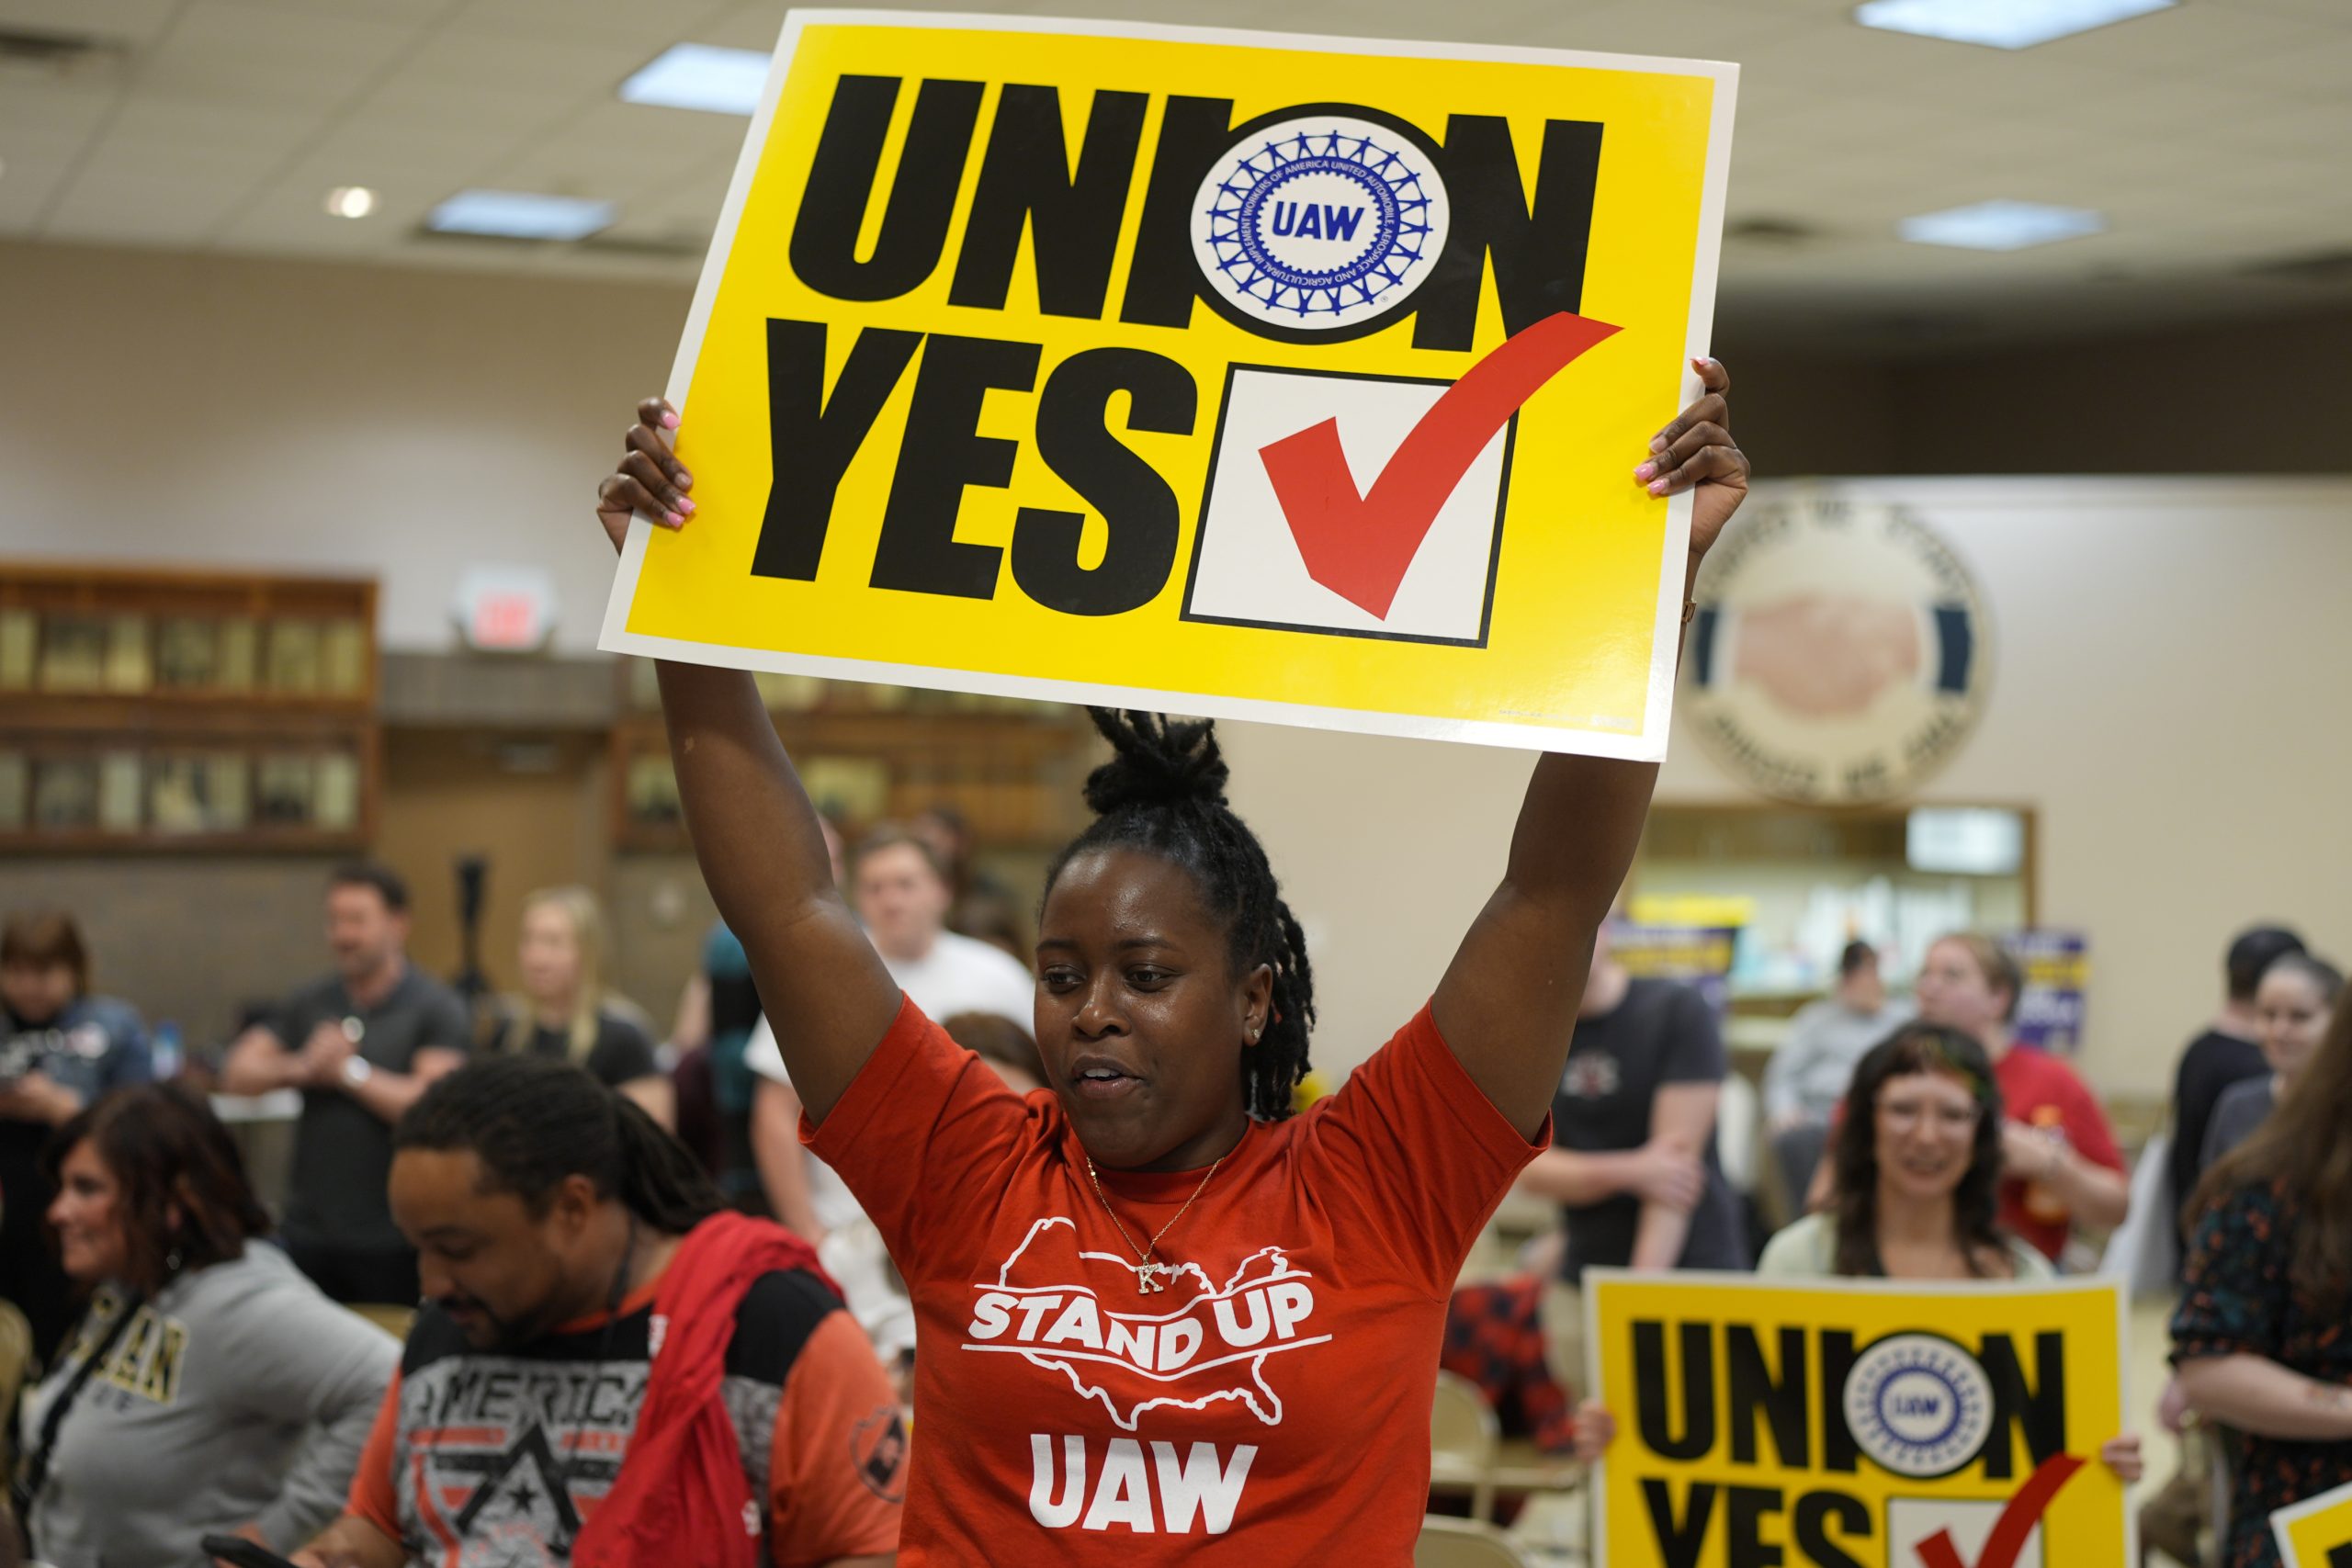 A woman in a red UAW t-shirt holds a yellow sign reading "Union Yes" over her head